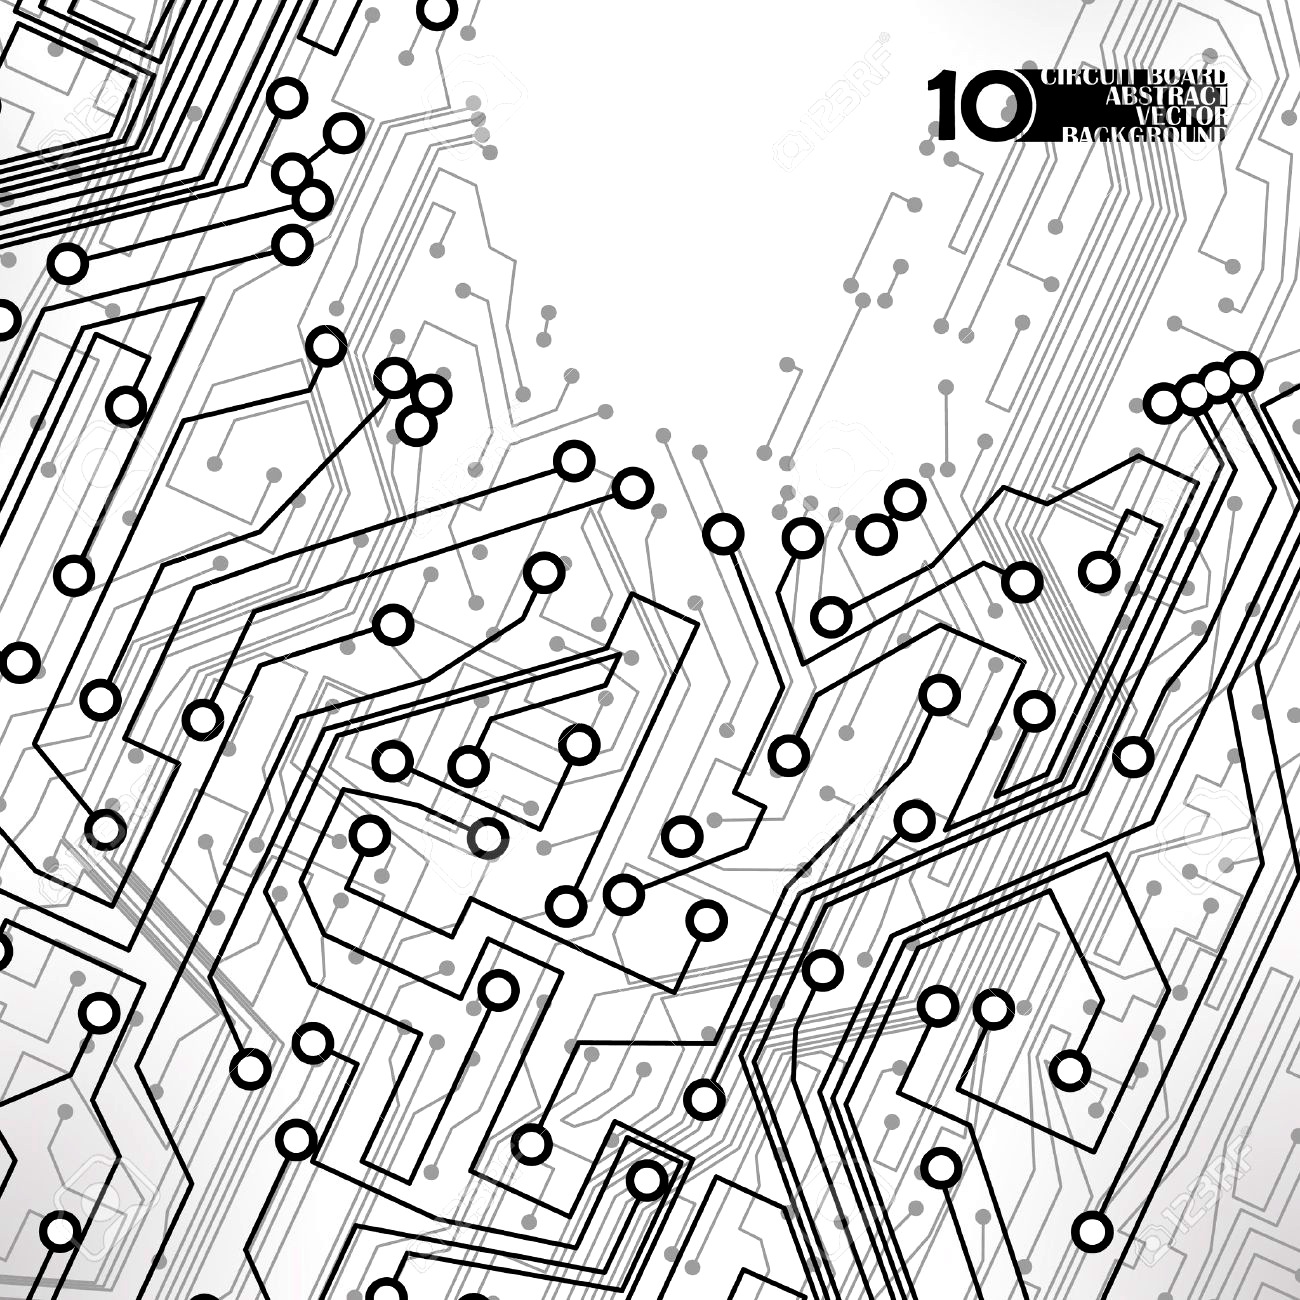 Component. free circuit: Abstract Circuit Board Background Texture 